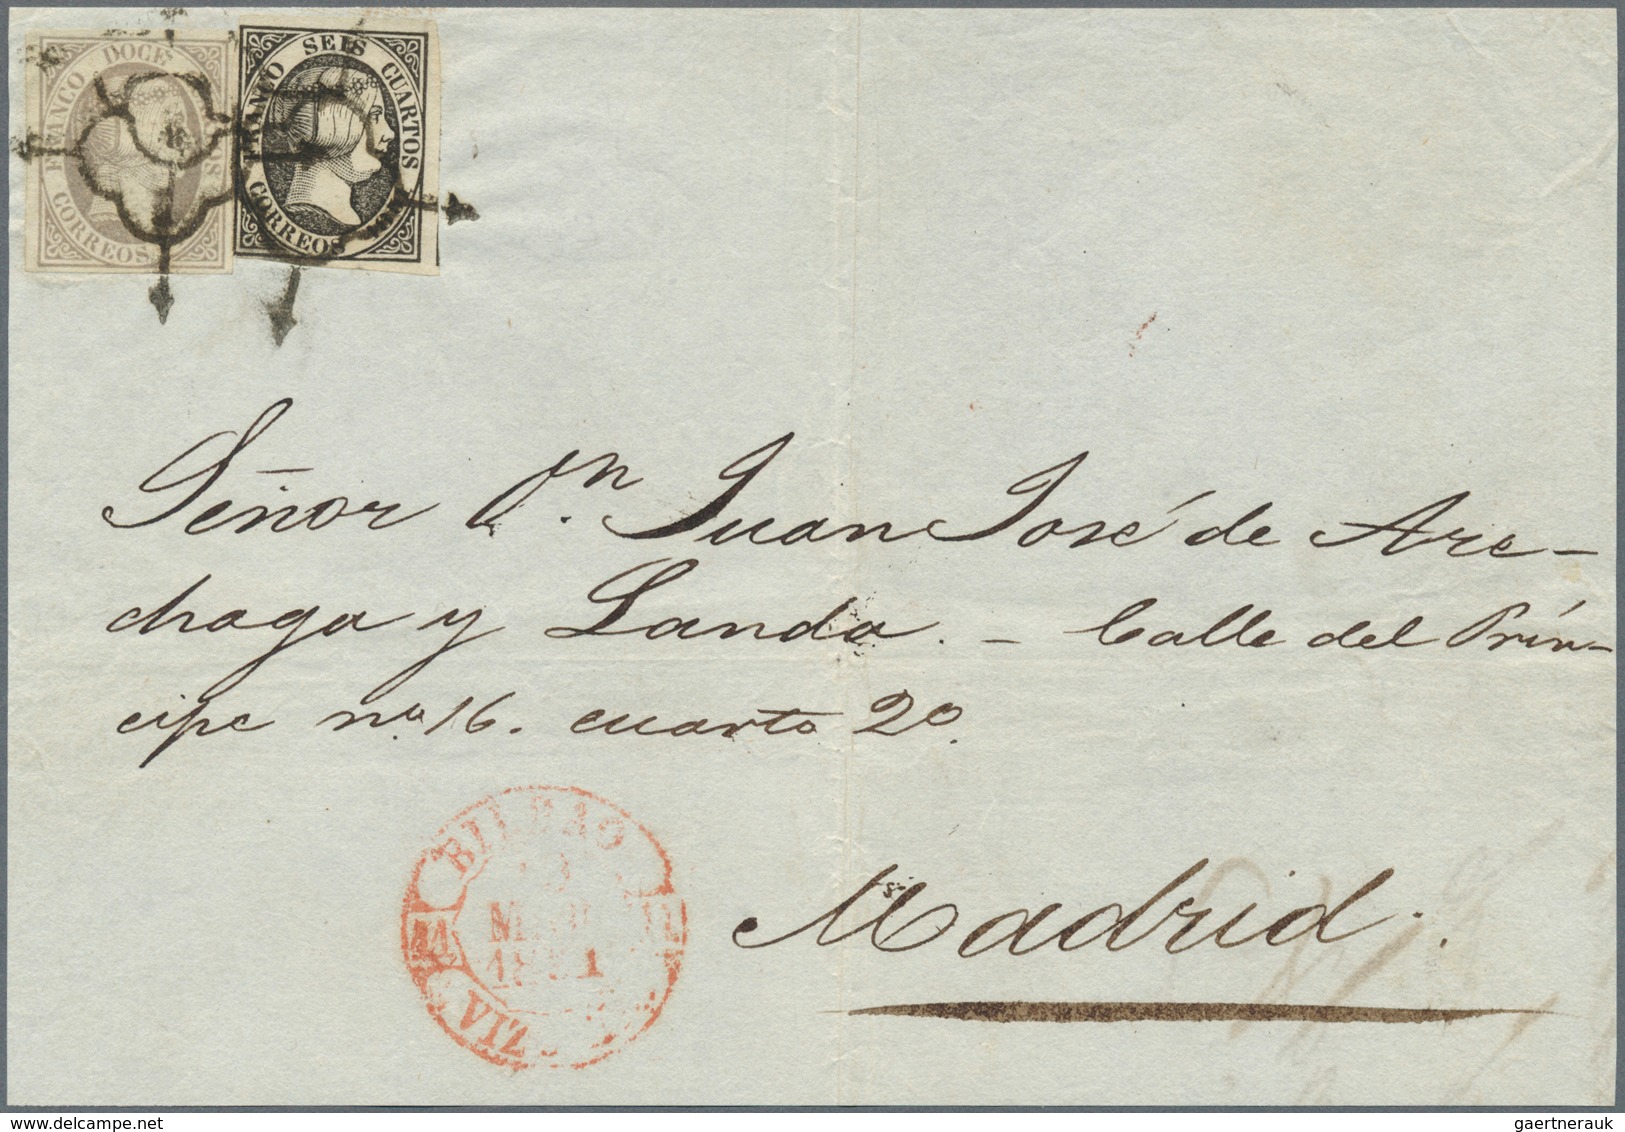 Spanien: 1850-1865 "JEWELS OF CLASSIC SPAIN": Specialized collection of top items of the imperforate